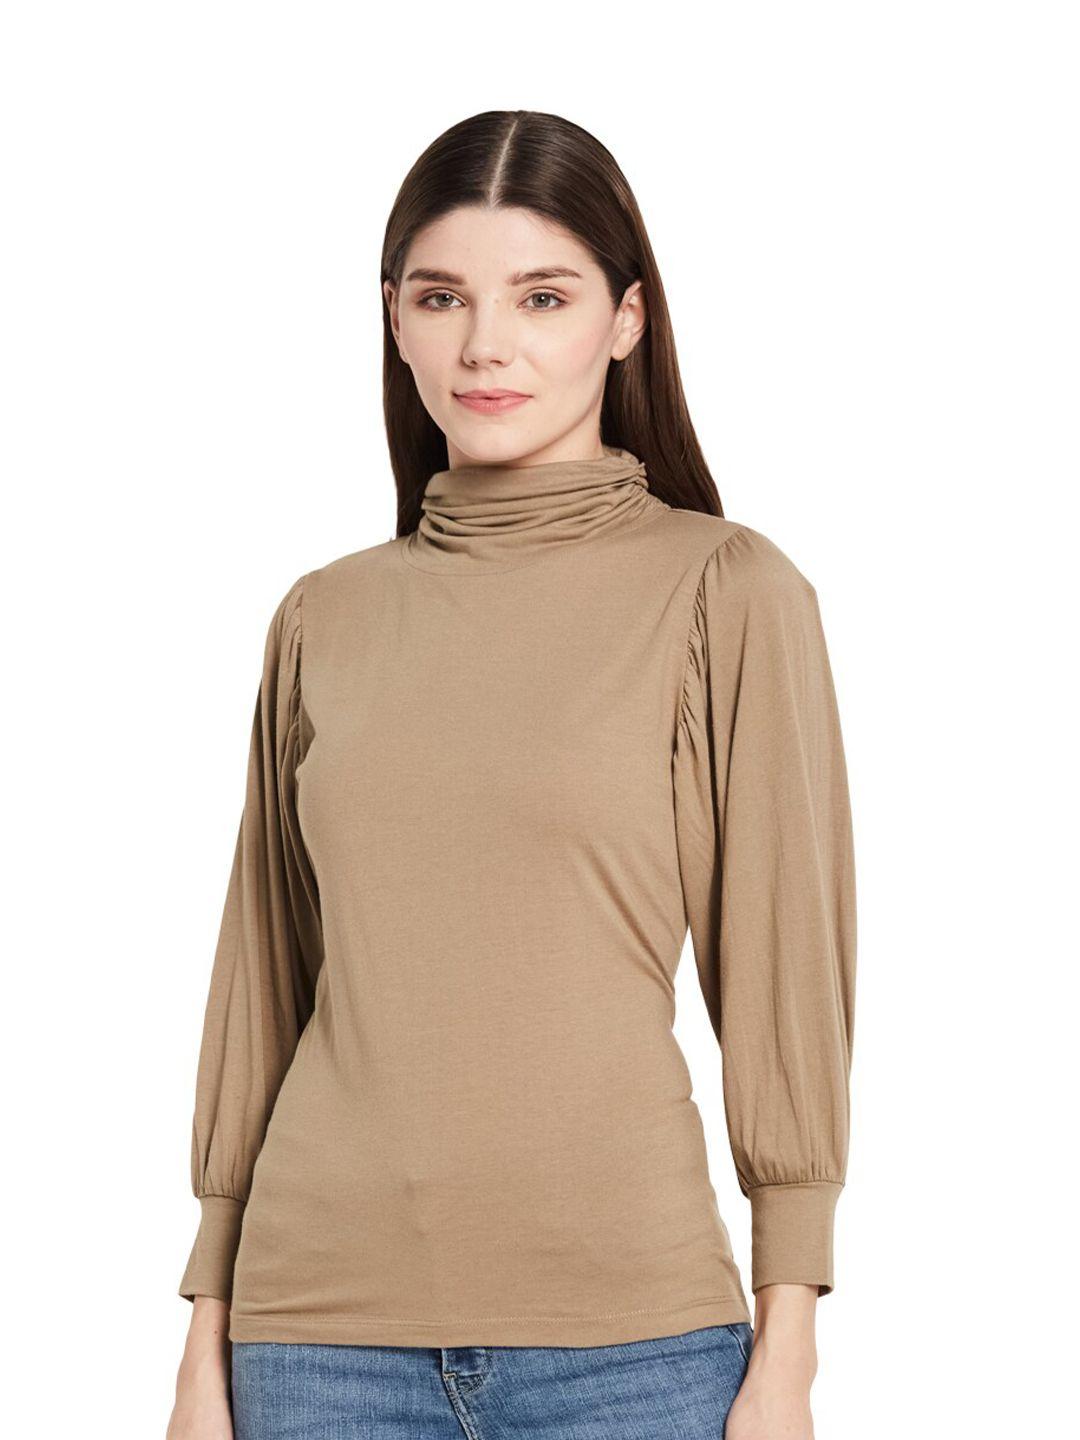 unmade women taupe solid high neck cuffed sleeves top